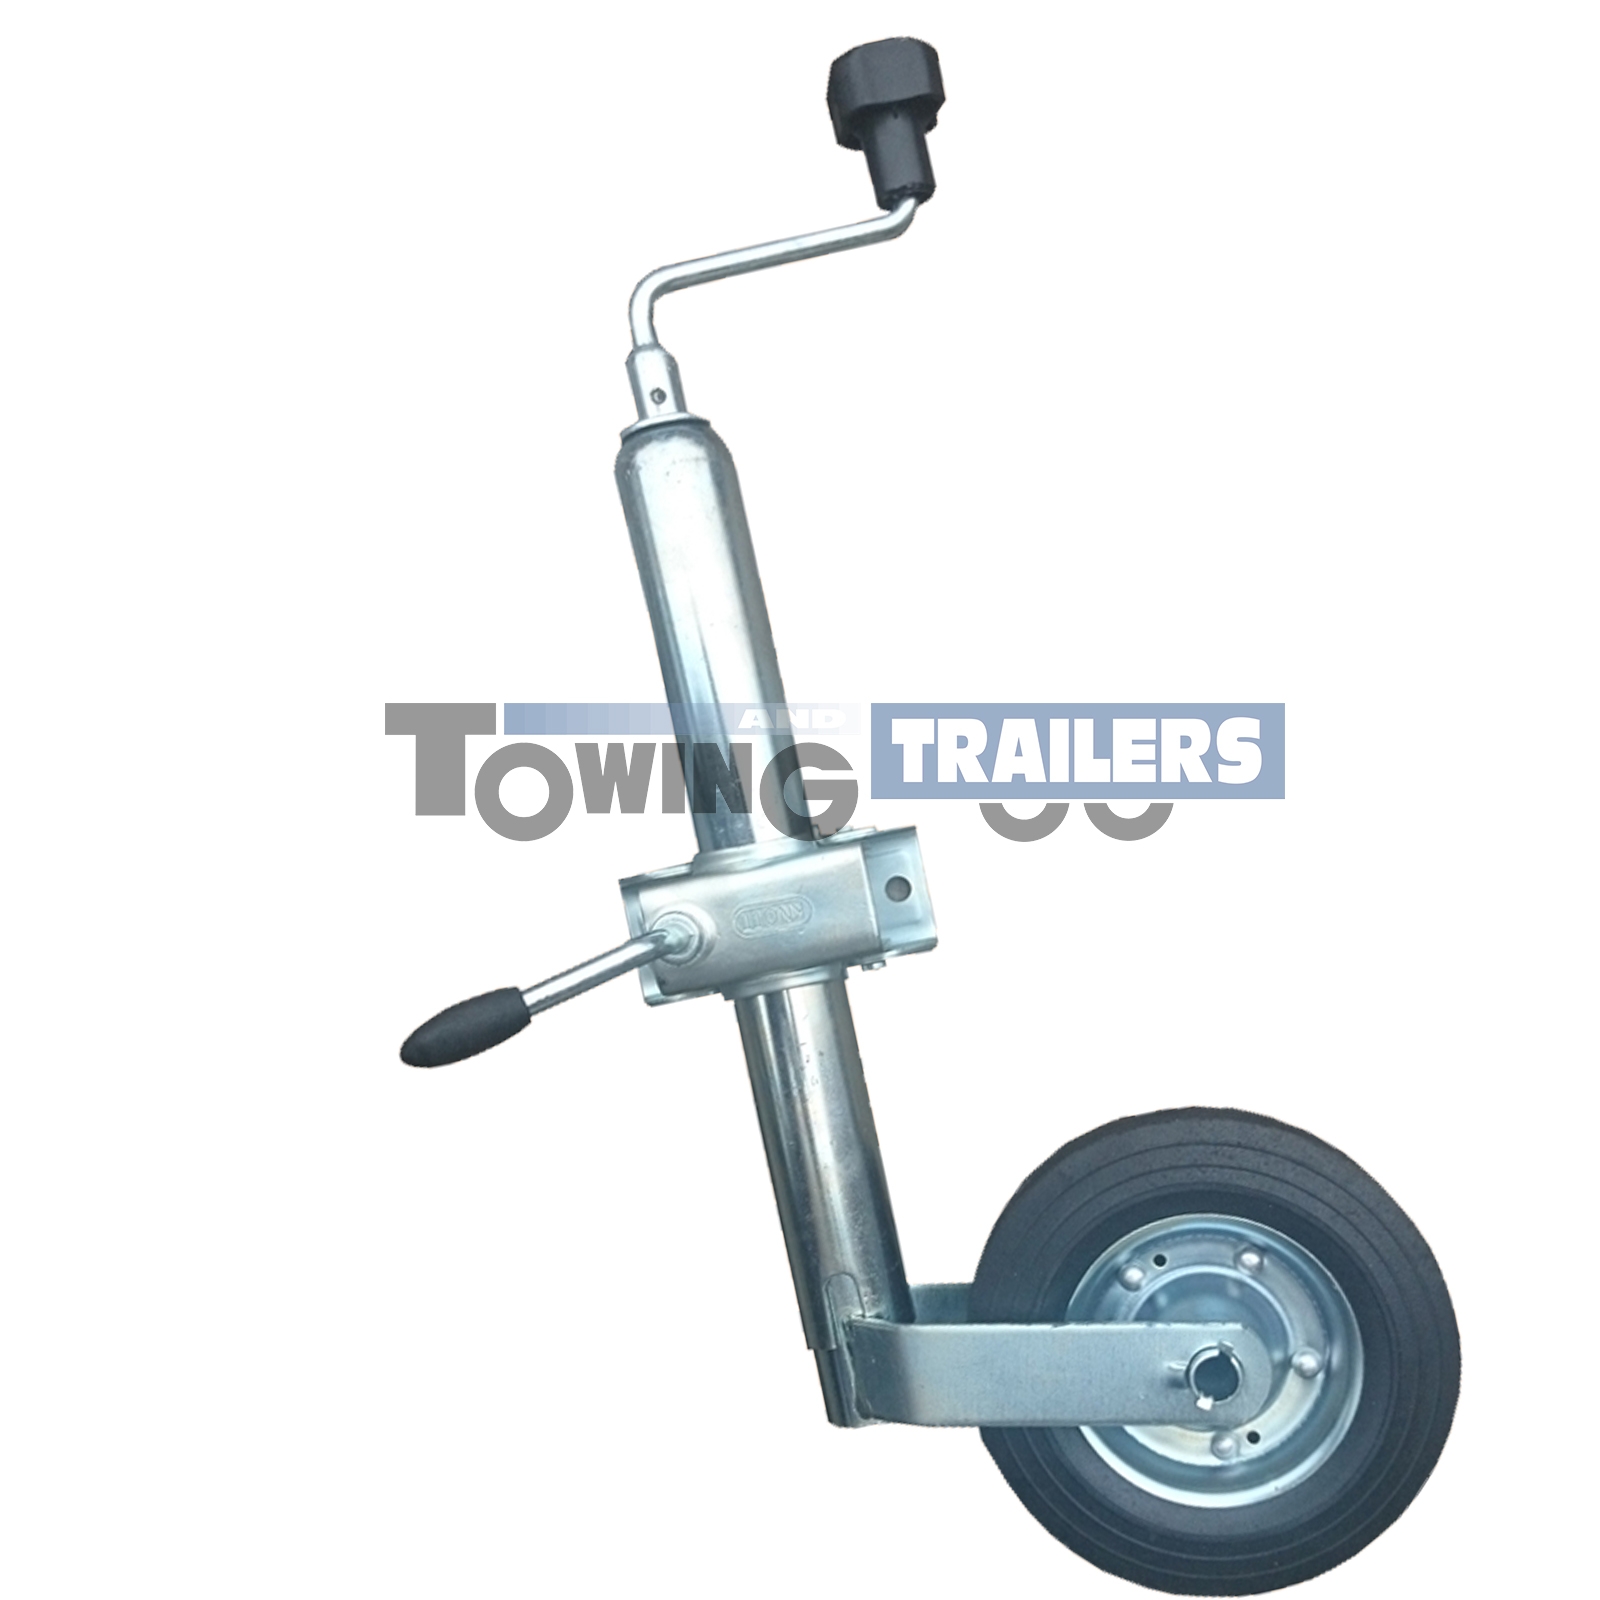 34mm trailer jockey wheel and clamp For Franc trailers Free p/p 